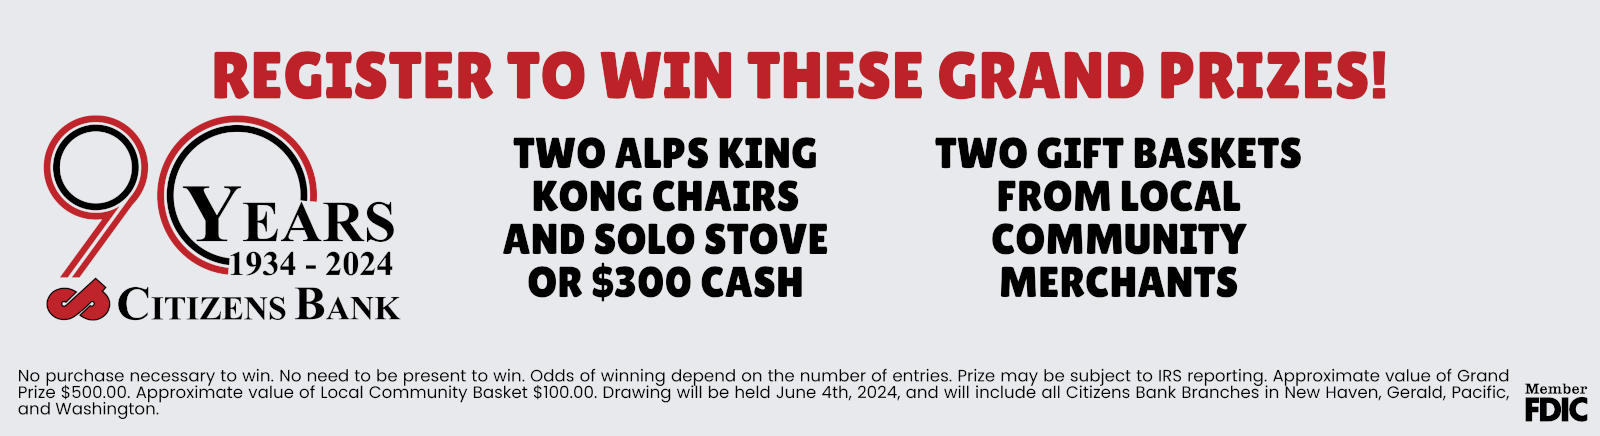 90 YEARS 1934 - 2024 CITIZENS BANK REGISTER TO WIN THESE GRAND PRIZES TWO ALPS KING KONG CHAIRS AND SOLO STOVE OR $300 CASH TWO GIFT BASKETS FROM LOCAL COMMUNITY MERCHANTS No purchase necessary to win. No need to be present to win. Odds of winning depends on the number of entries. Prize may be subject to IRS reporting. Approximate value of Grand Prize $500.00. Approximate value of Local Community Basket $100.00. Drawing will be held June 4th, 2024, and will include all Citizens Bank Branches in New Haven, Gerald, Pacific, and Washington.